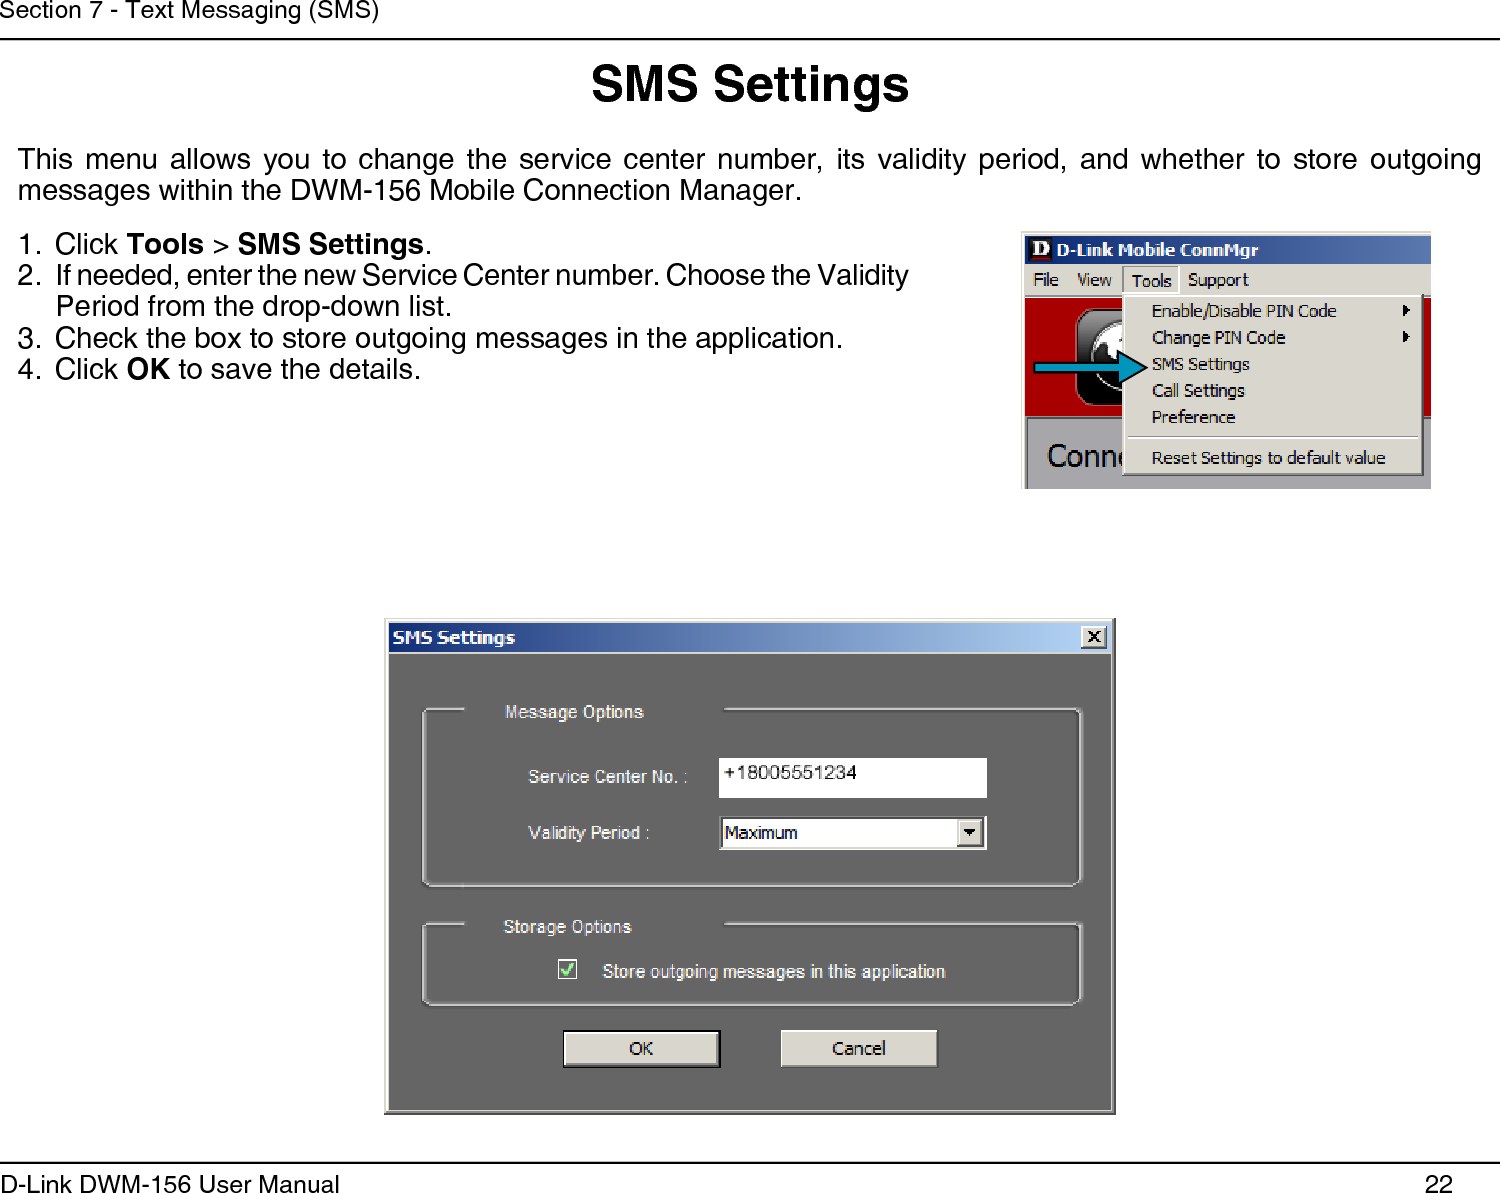 22D-Link DWM-156 User ManualSection 7 - Text Messaging (SMS)SMS SettingsThis  menu  allows  you  to  change  the  service  center  number,  its  validity  period,  and  whether  to  store  outgoing messages within the DWM-156 Mobile Connection Manager.Click 1.  Tools &gt; SMS Settings.If needed, enter the new Service Center number. Choose the Validity 2. Period from the drop-down list.Check the box to store outgoing messages in the application.3. Click 4.  OK to save the details. 